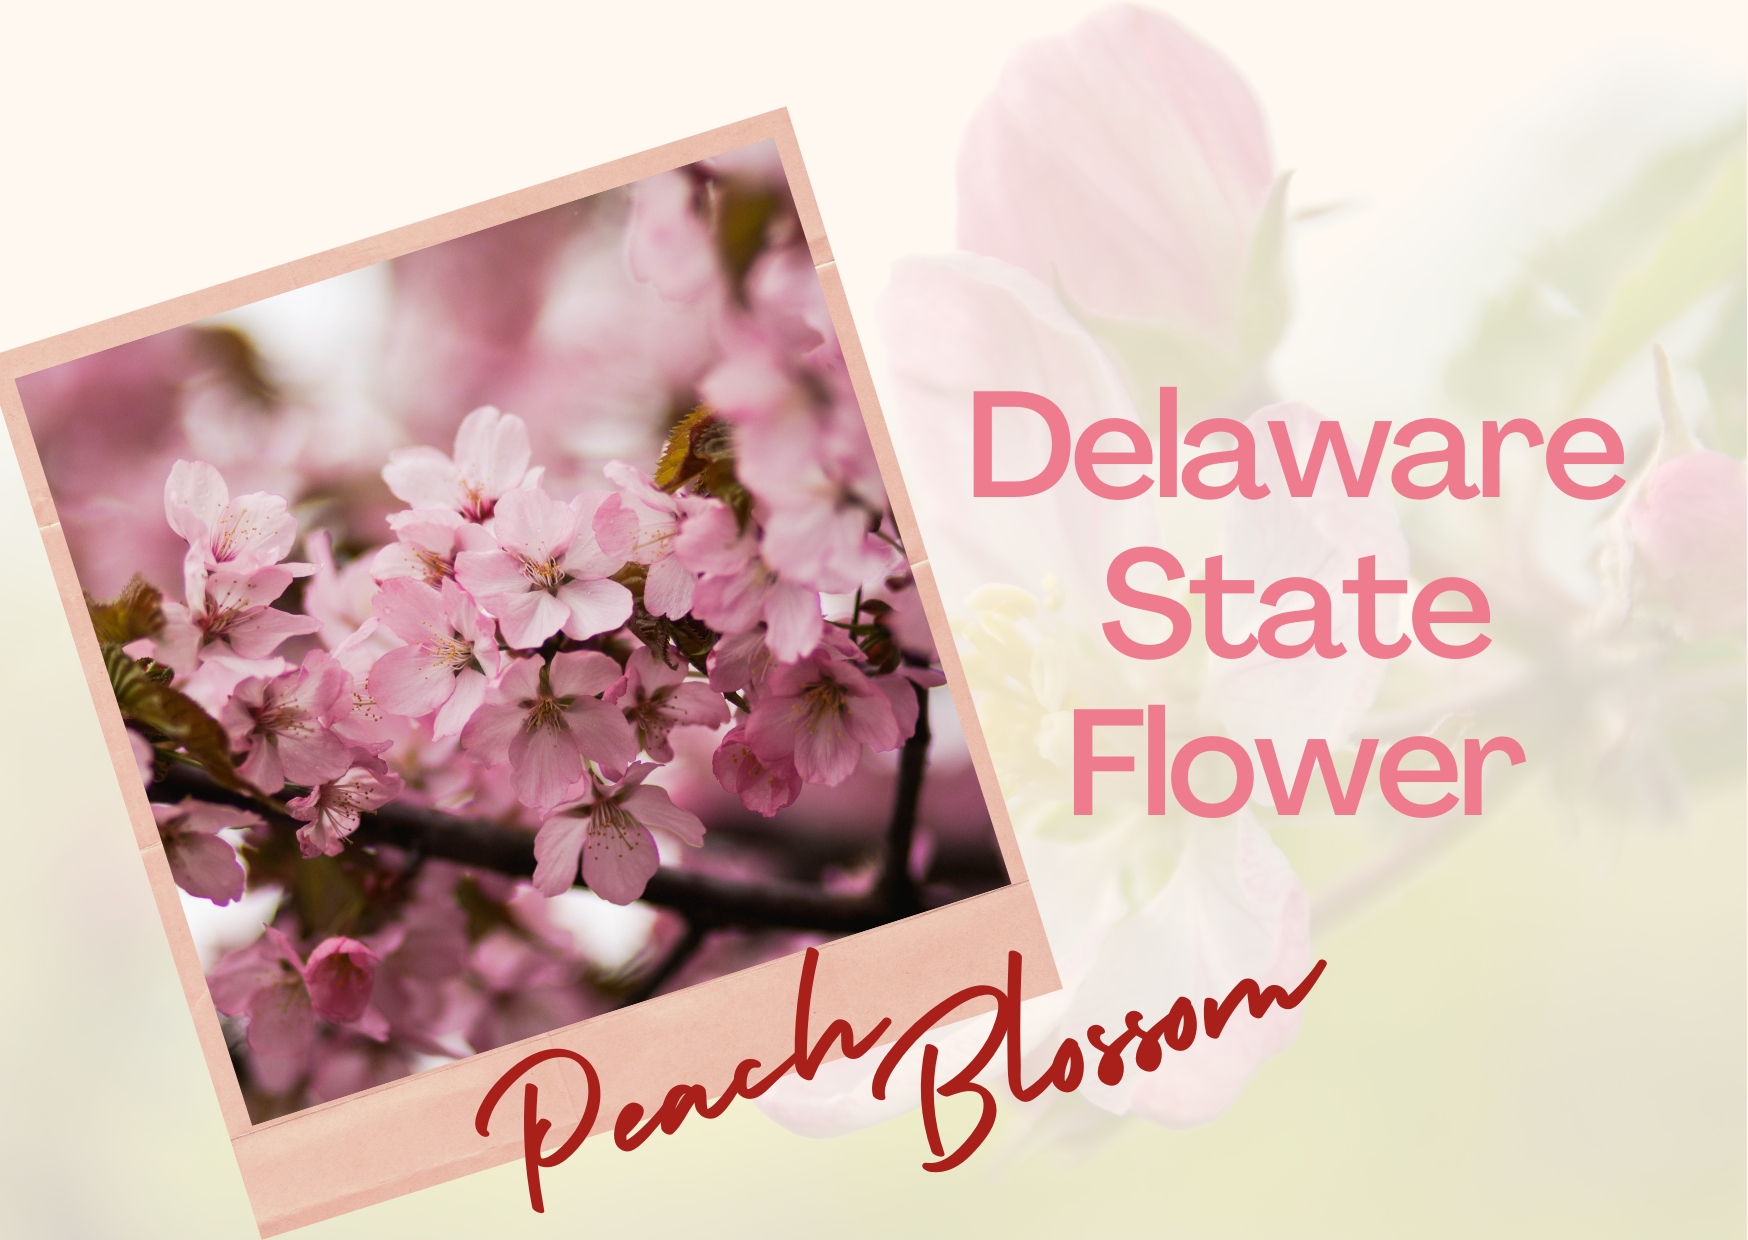 Plant a Delaware state flower and enjoy a peachy view